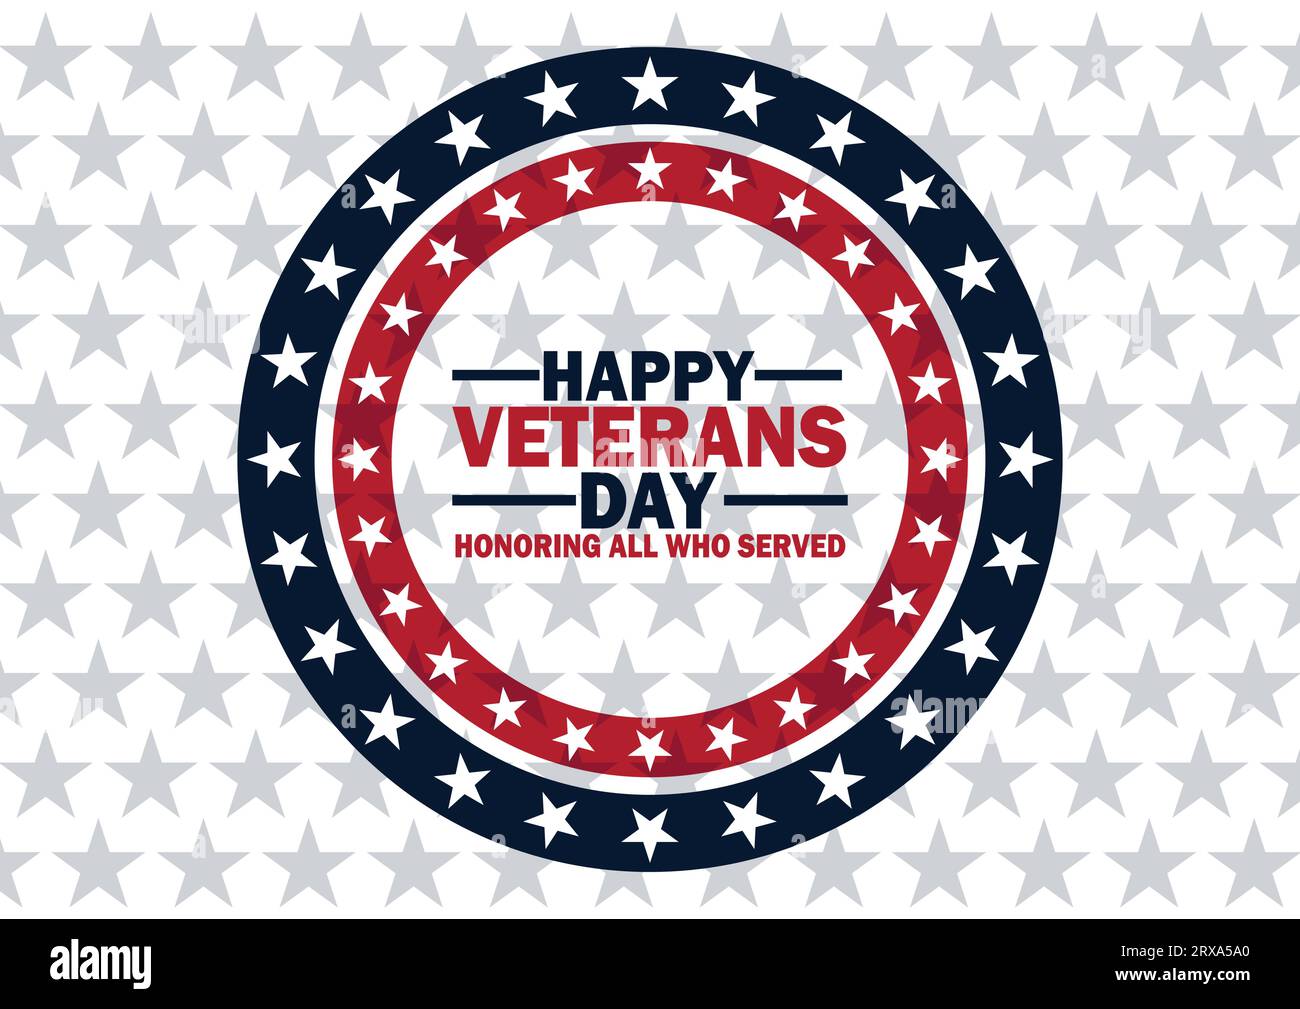 Happy Veterans Day Honoring All Who Served Retro Vintage Logo